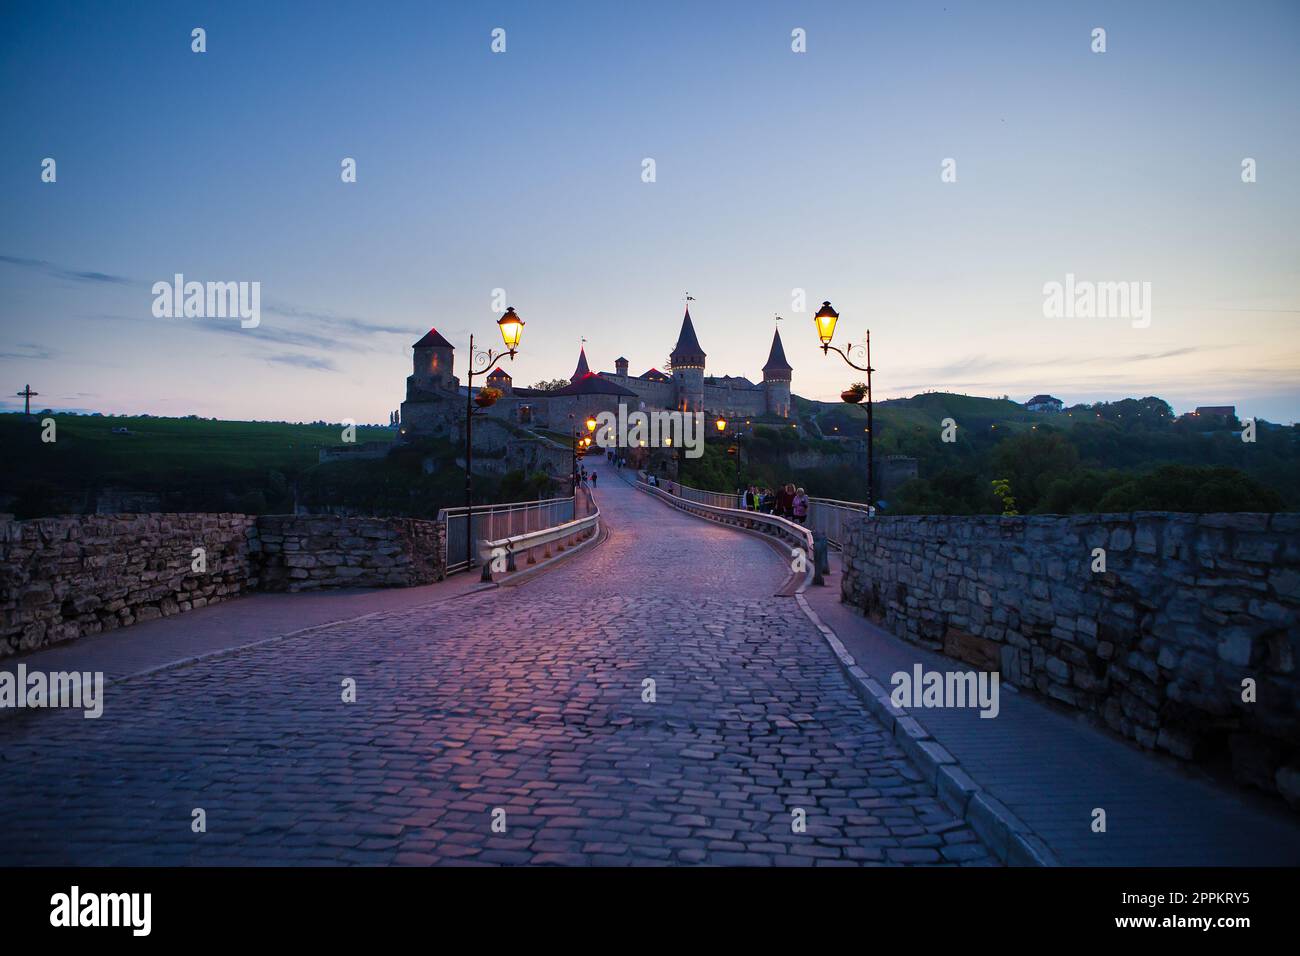 Kamianets-Podilskyi is a romantic city, a beautiful view of the evening city, lanterns illuminate the bridge. A picturesque summer view of the ancient castle-fortress in Kamianets-Podilskyi, Khmelnytskyi region, Ukraine. Stock Photo